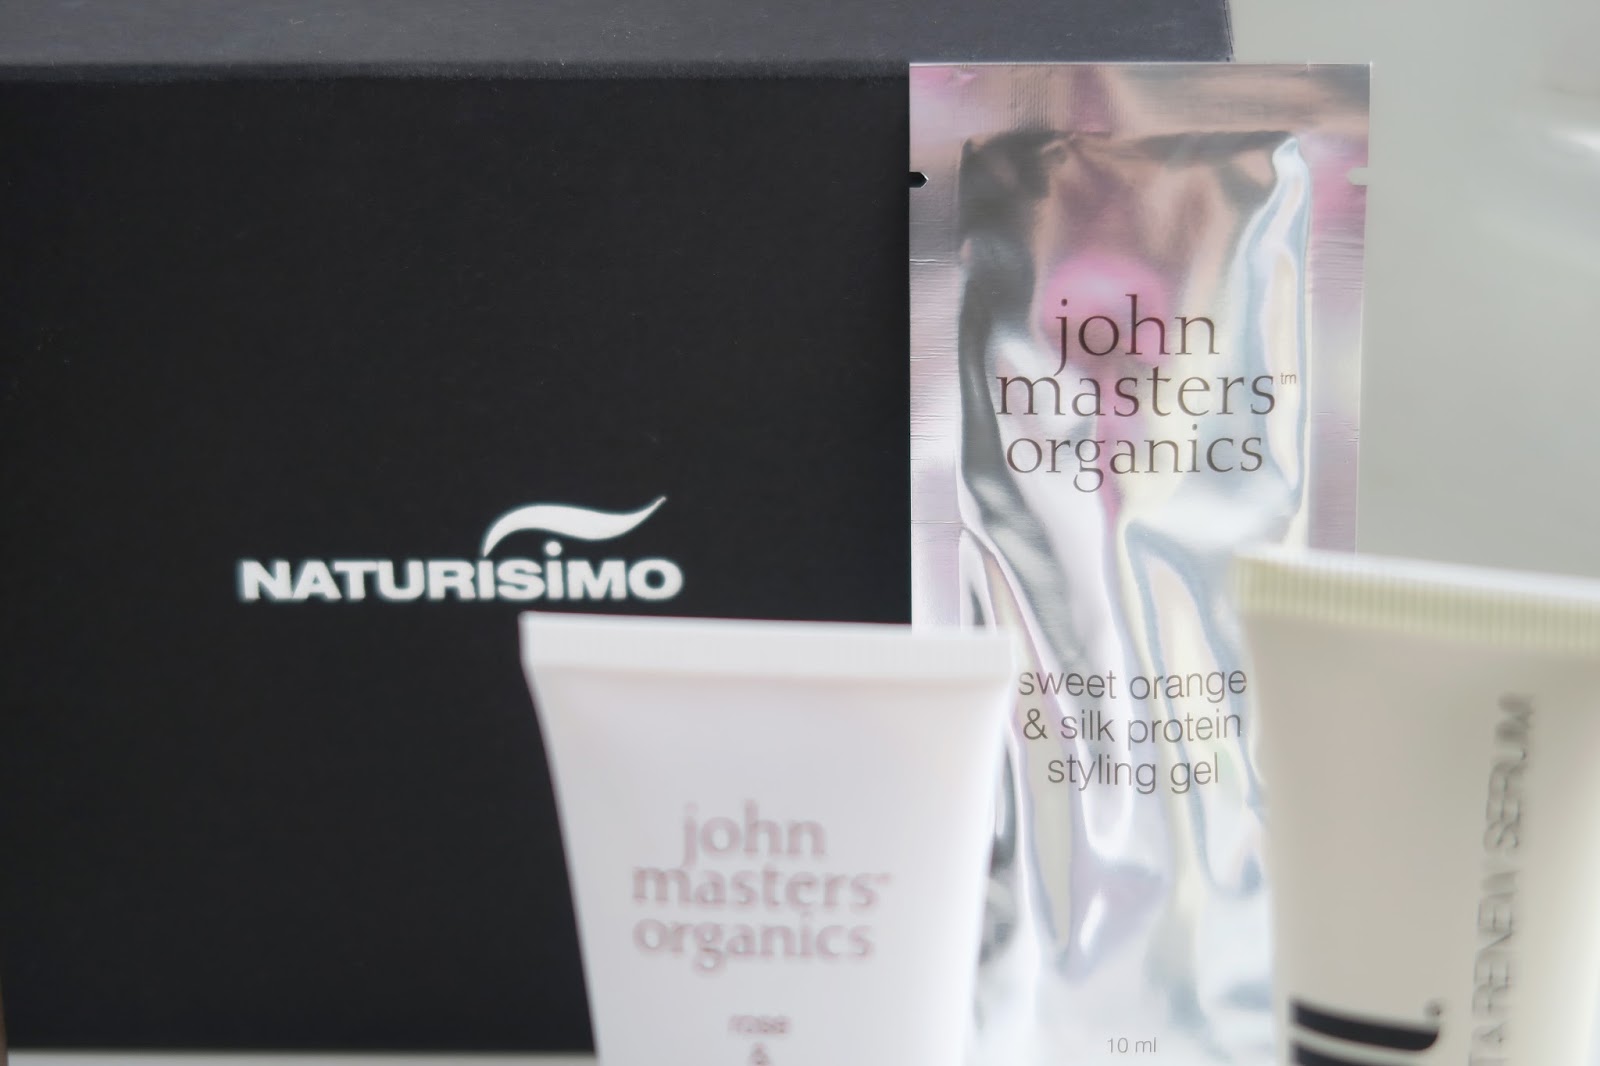 Naturisimo Gorgeous Hair Discovery Box is full of natural and organic hair products.